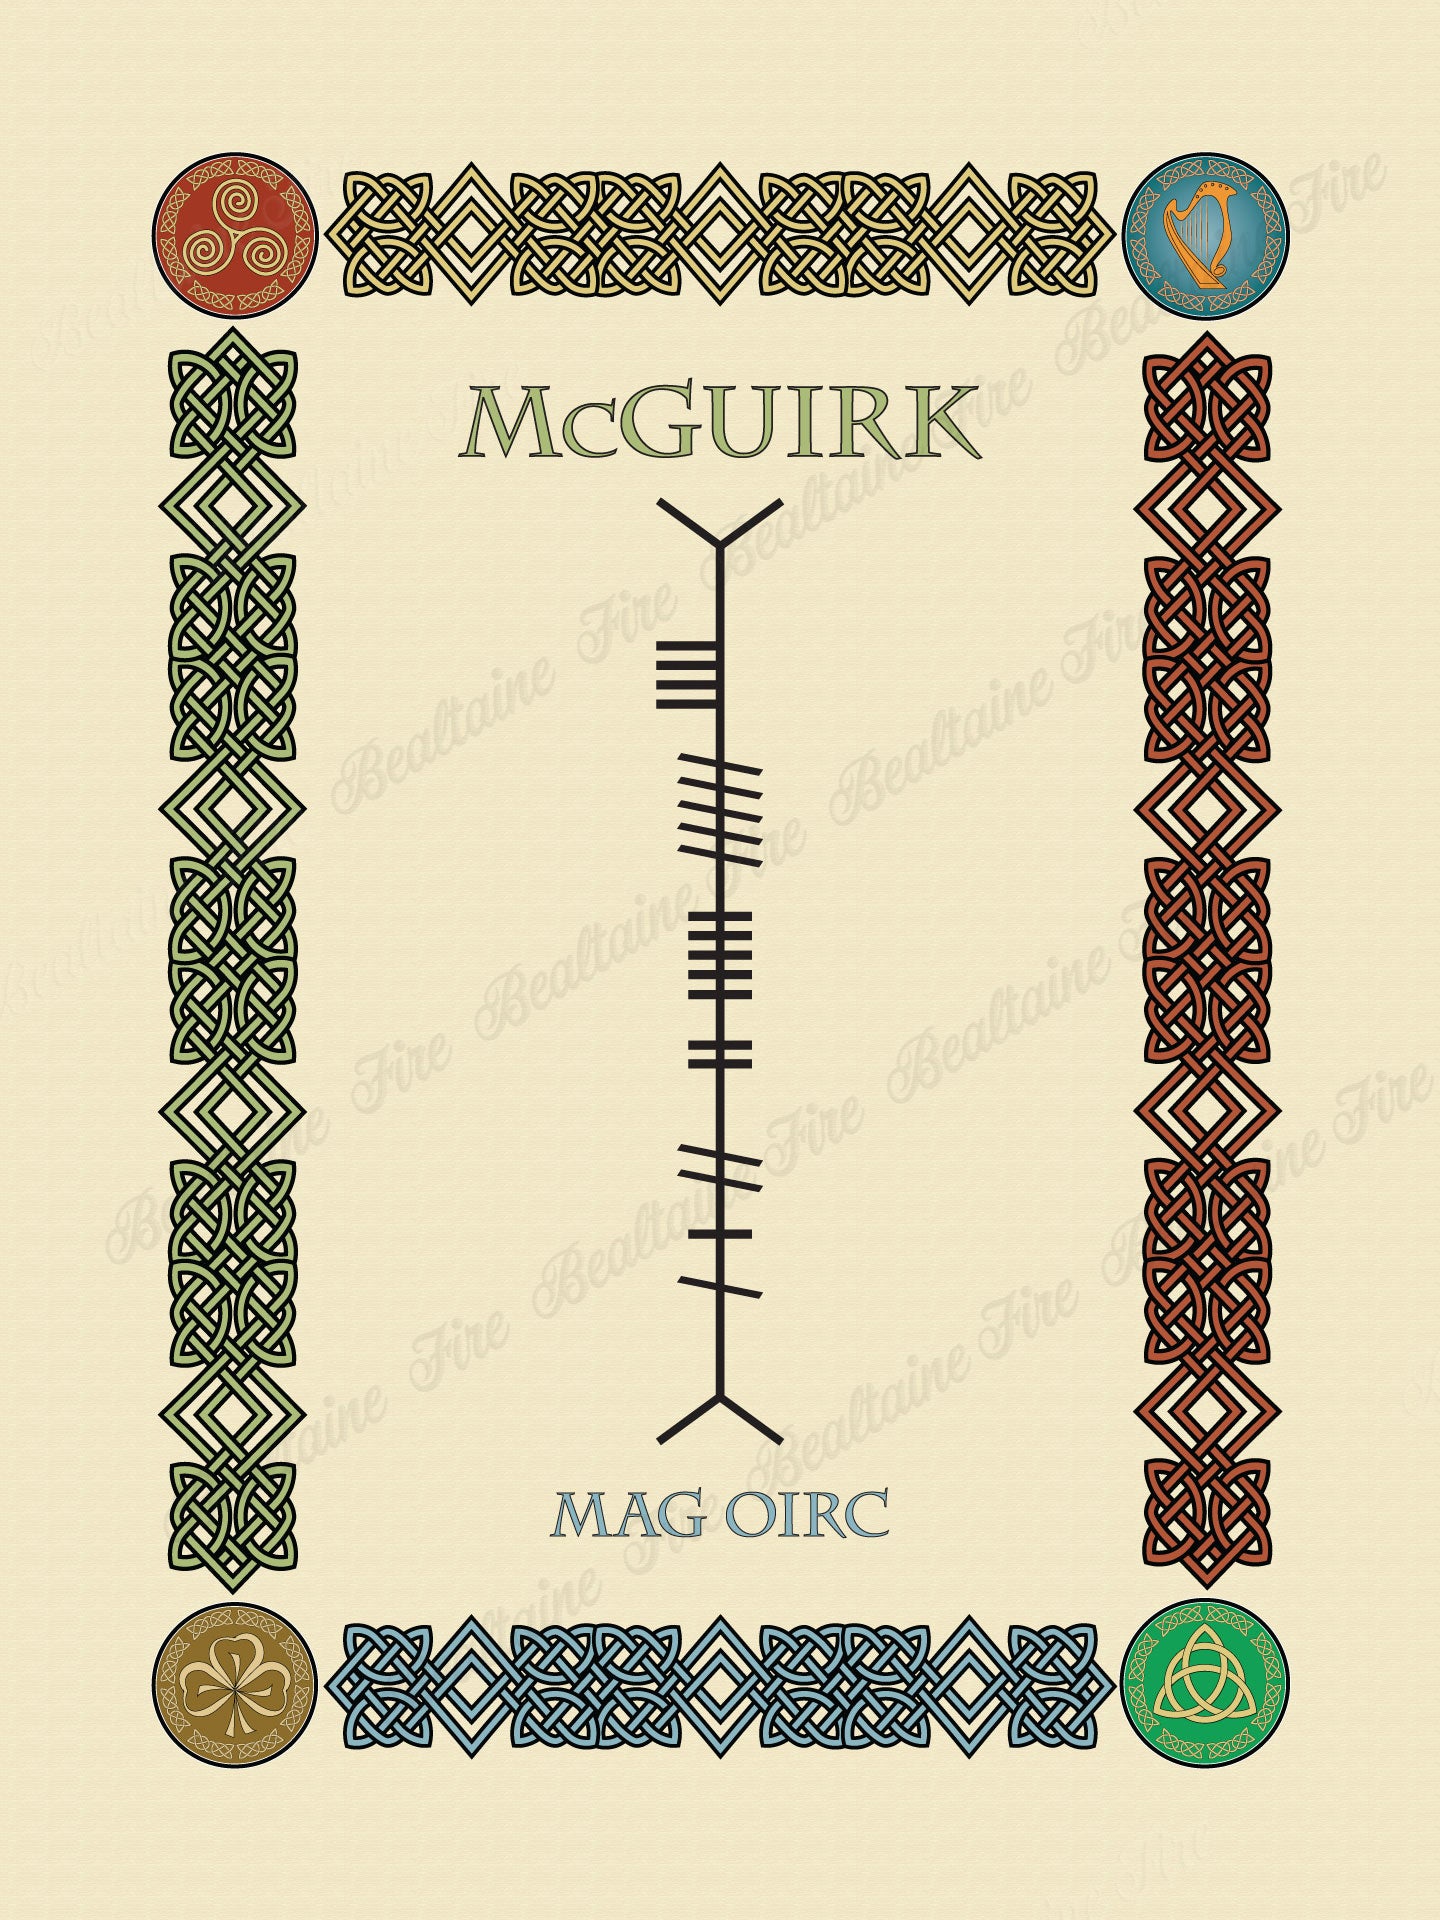 McGuirk in Old Irish and Ogham - Premium luster unframed print